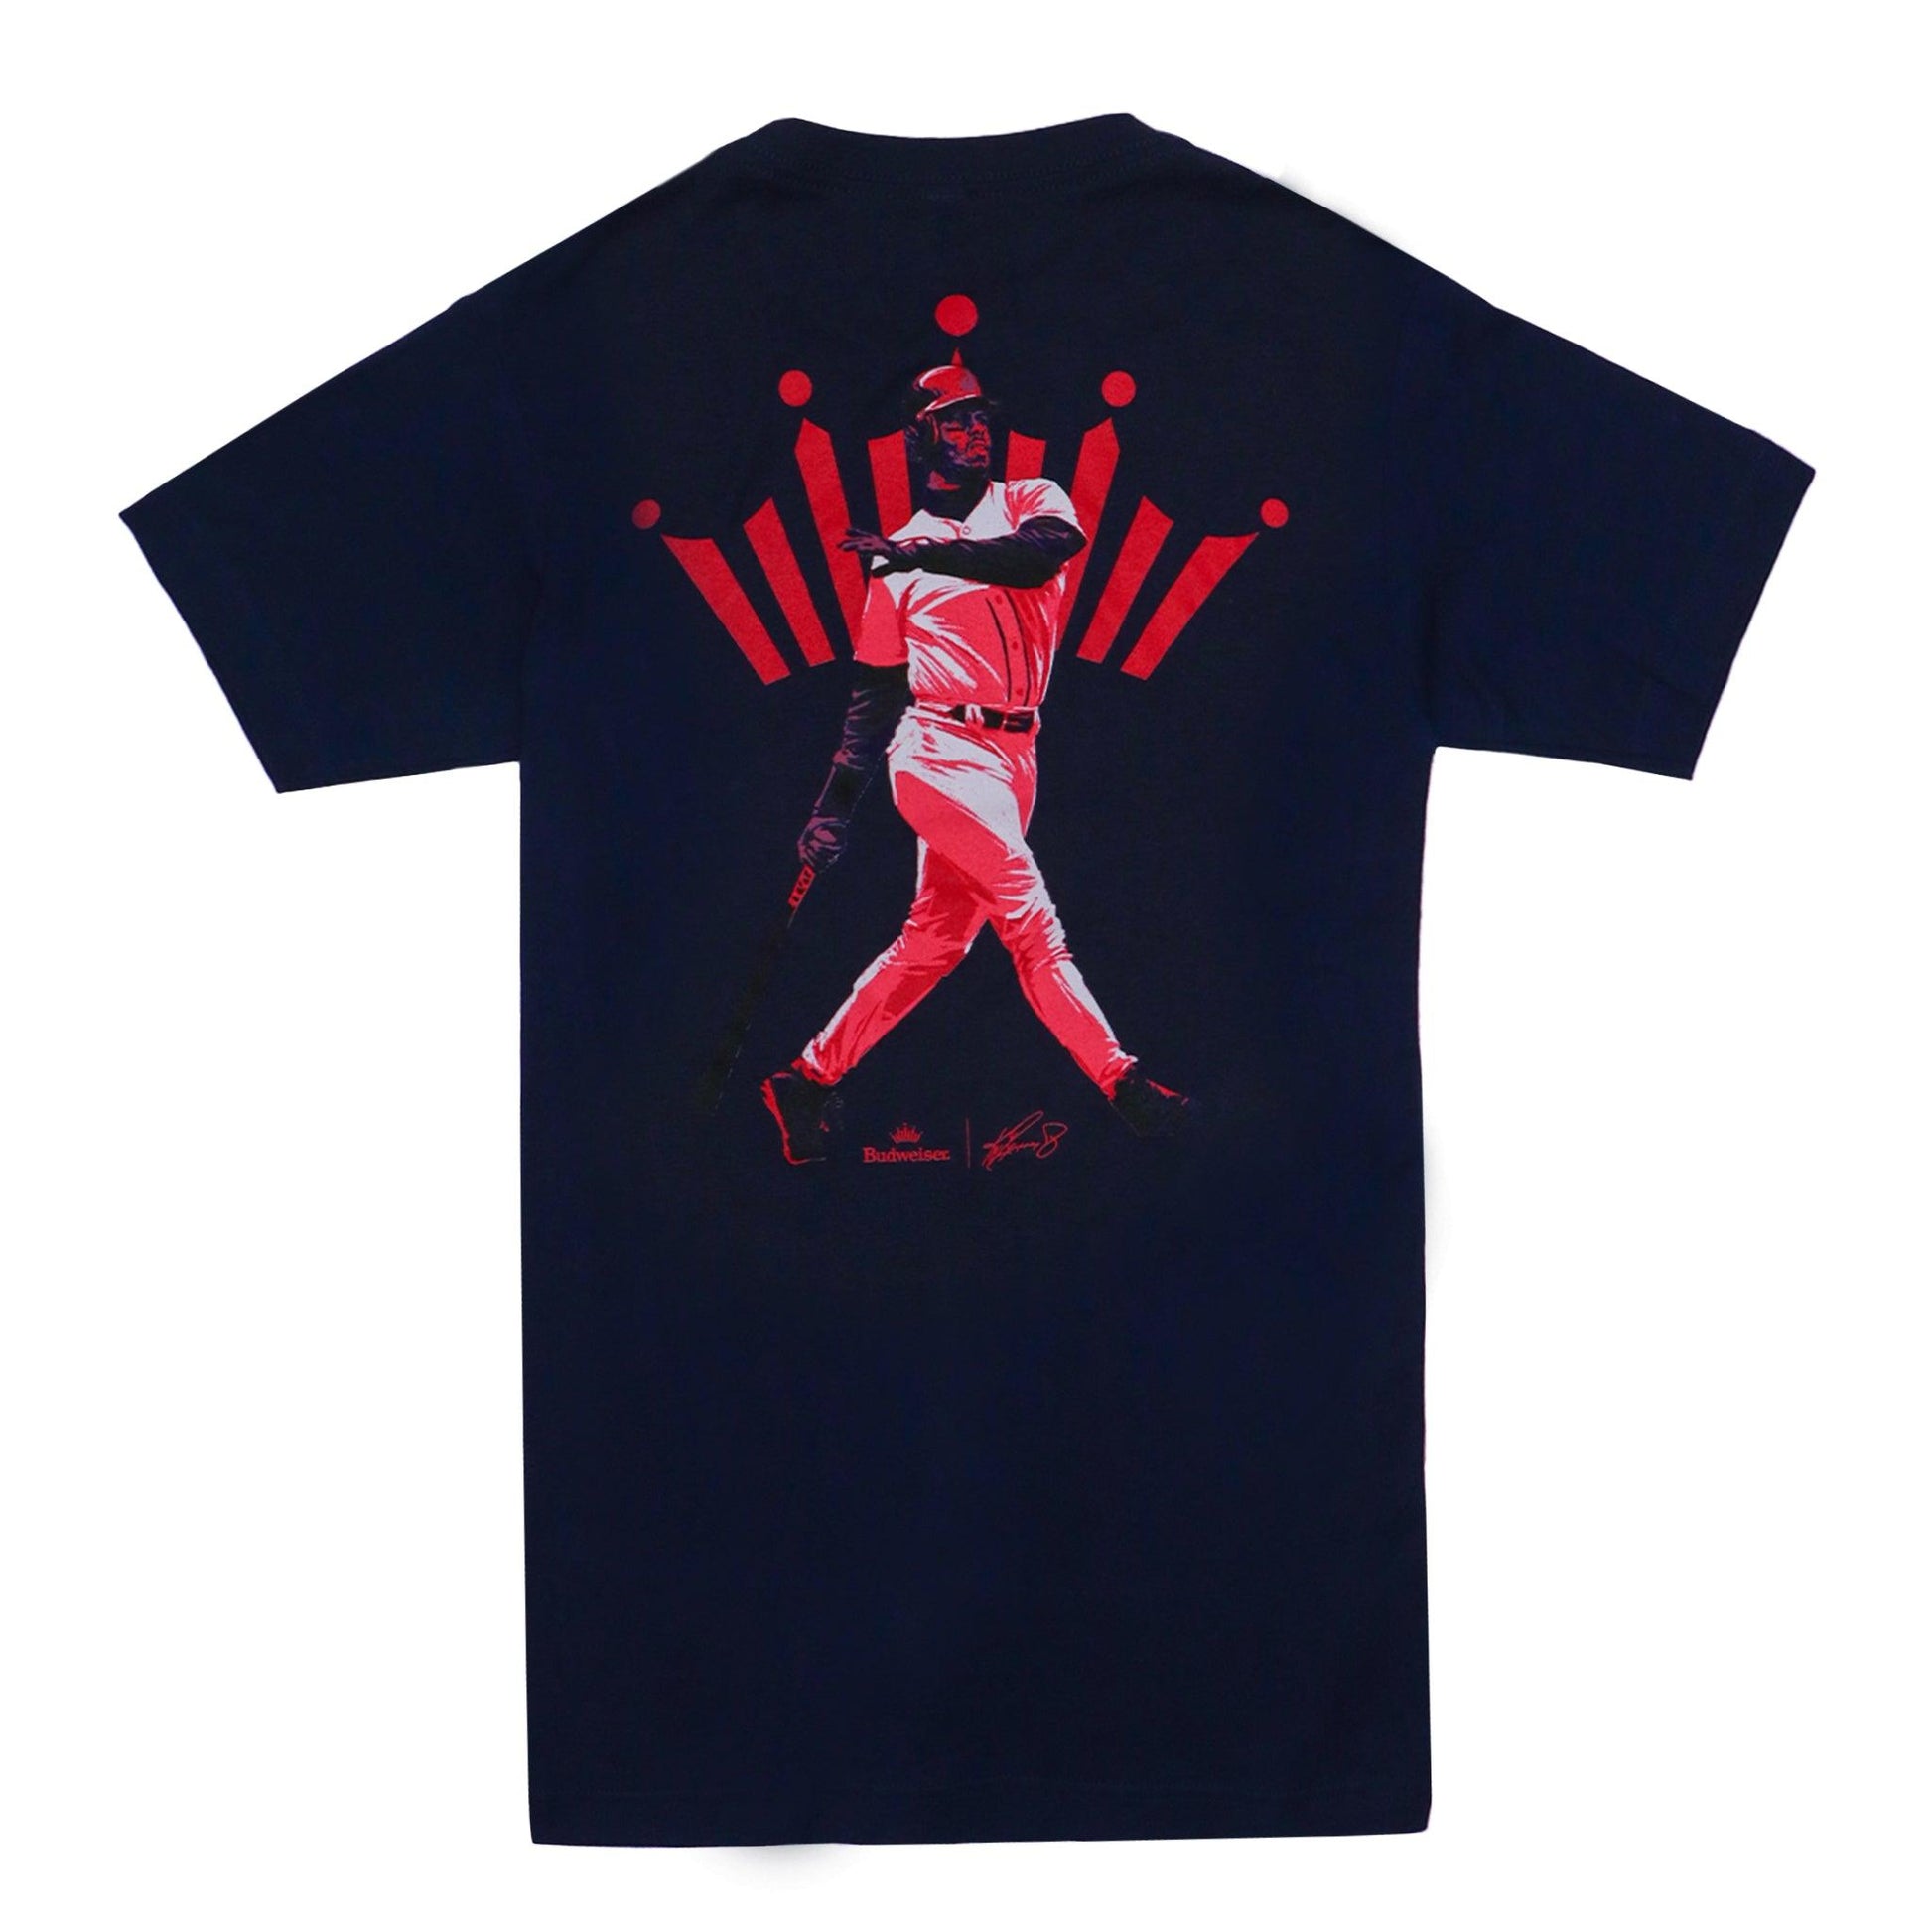 Back of tee with Budweiser Crown with Ken Griffey Jr. Swinging bat